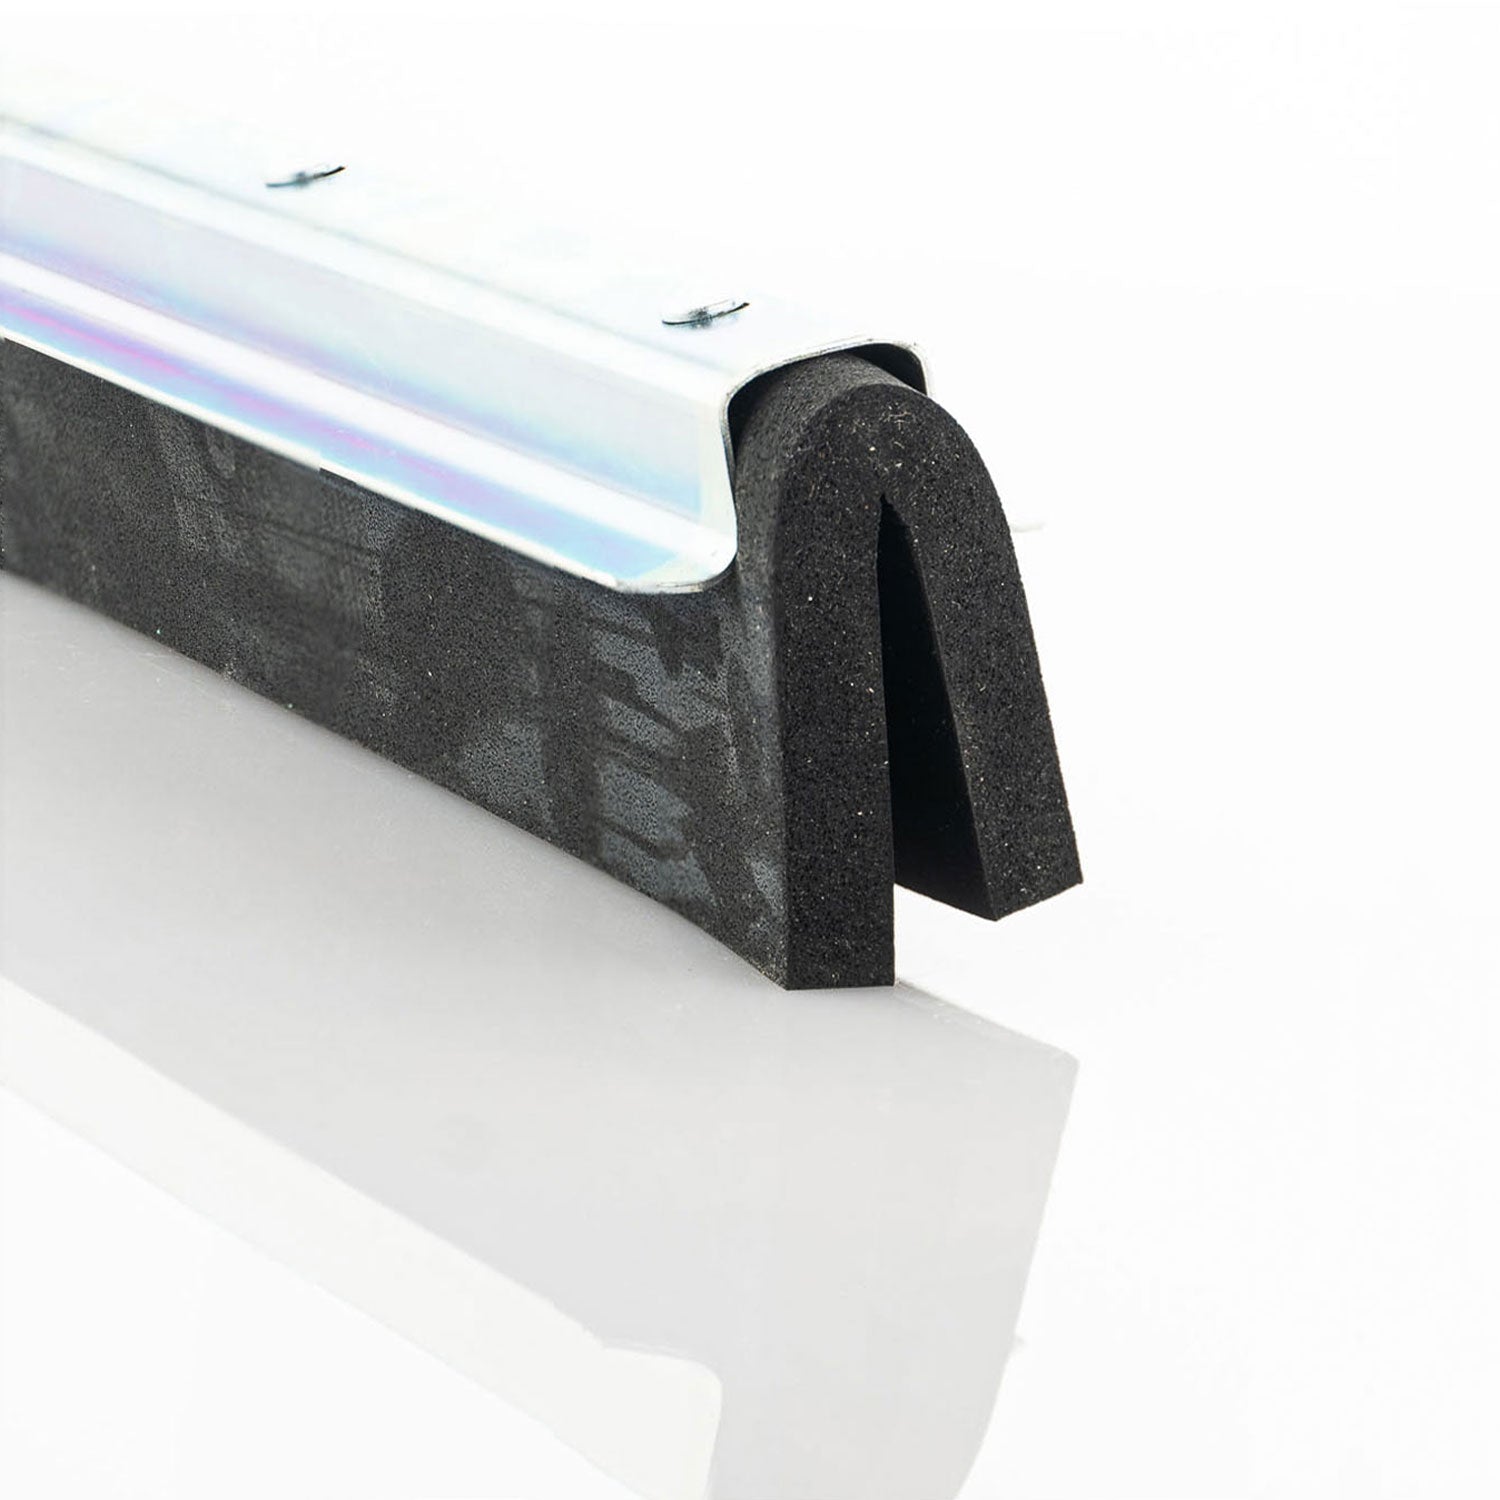 neoprene-squeegee-close-up